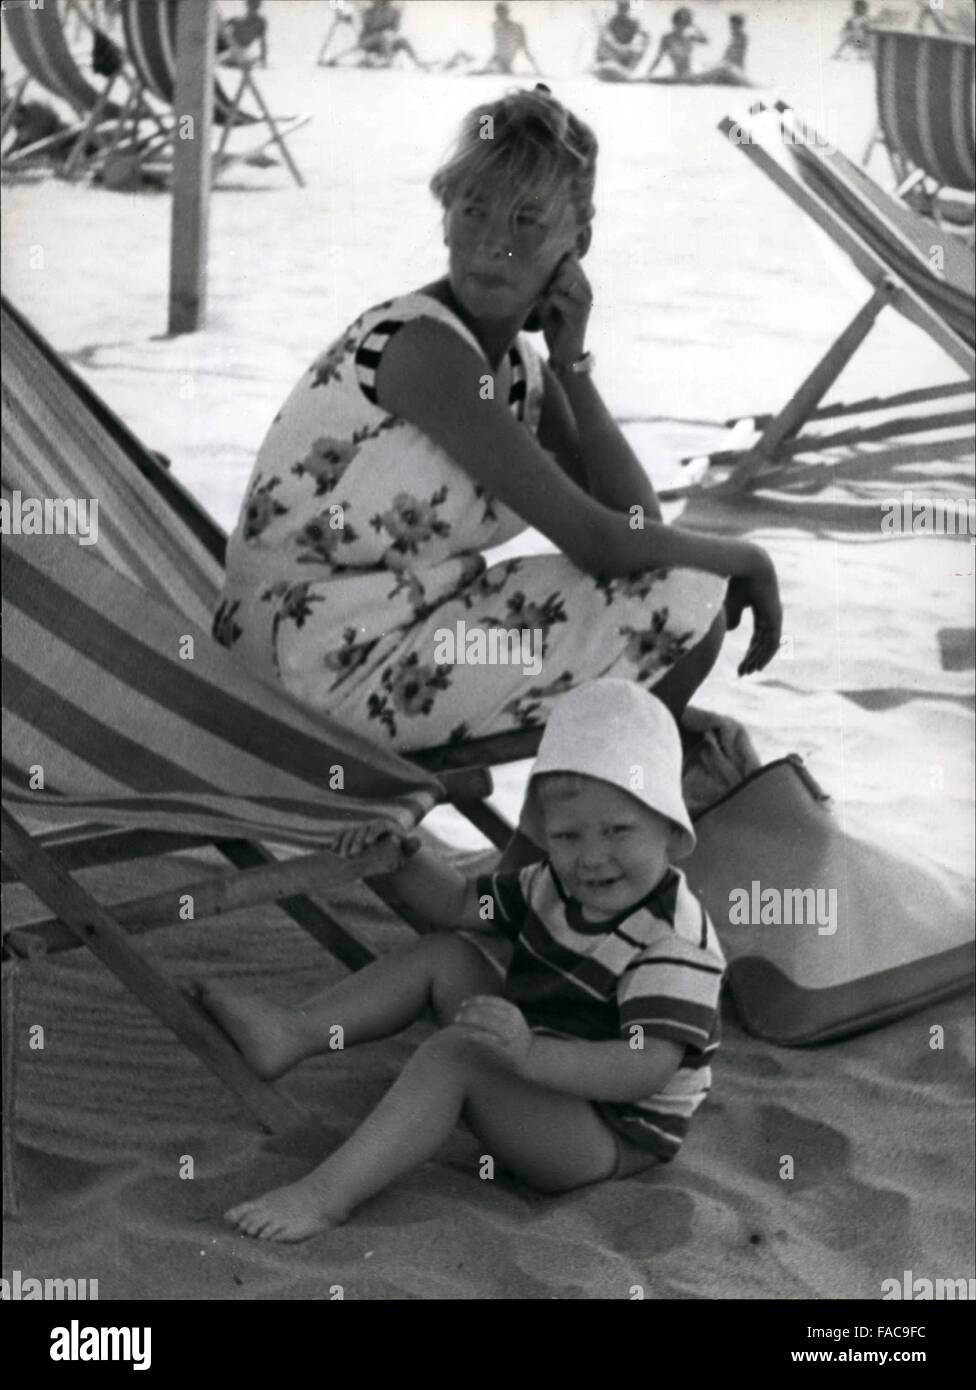 1968 - Paola di Liegi and her family at the beach of Marina di Massa, where they will stay for two months. The little Phillipe enjoys himself on the beach, while his sister Princess Astrid, sleeps on the baby carriage. © Keystone Pictures USA/ZUMAPRESS.com/Alamy Live News Stock Photo